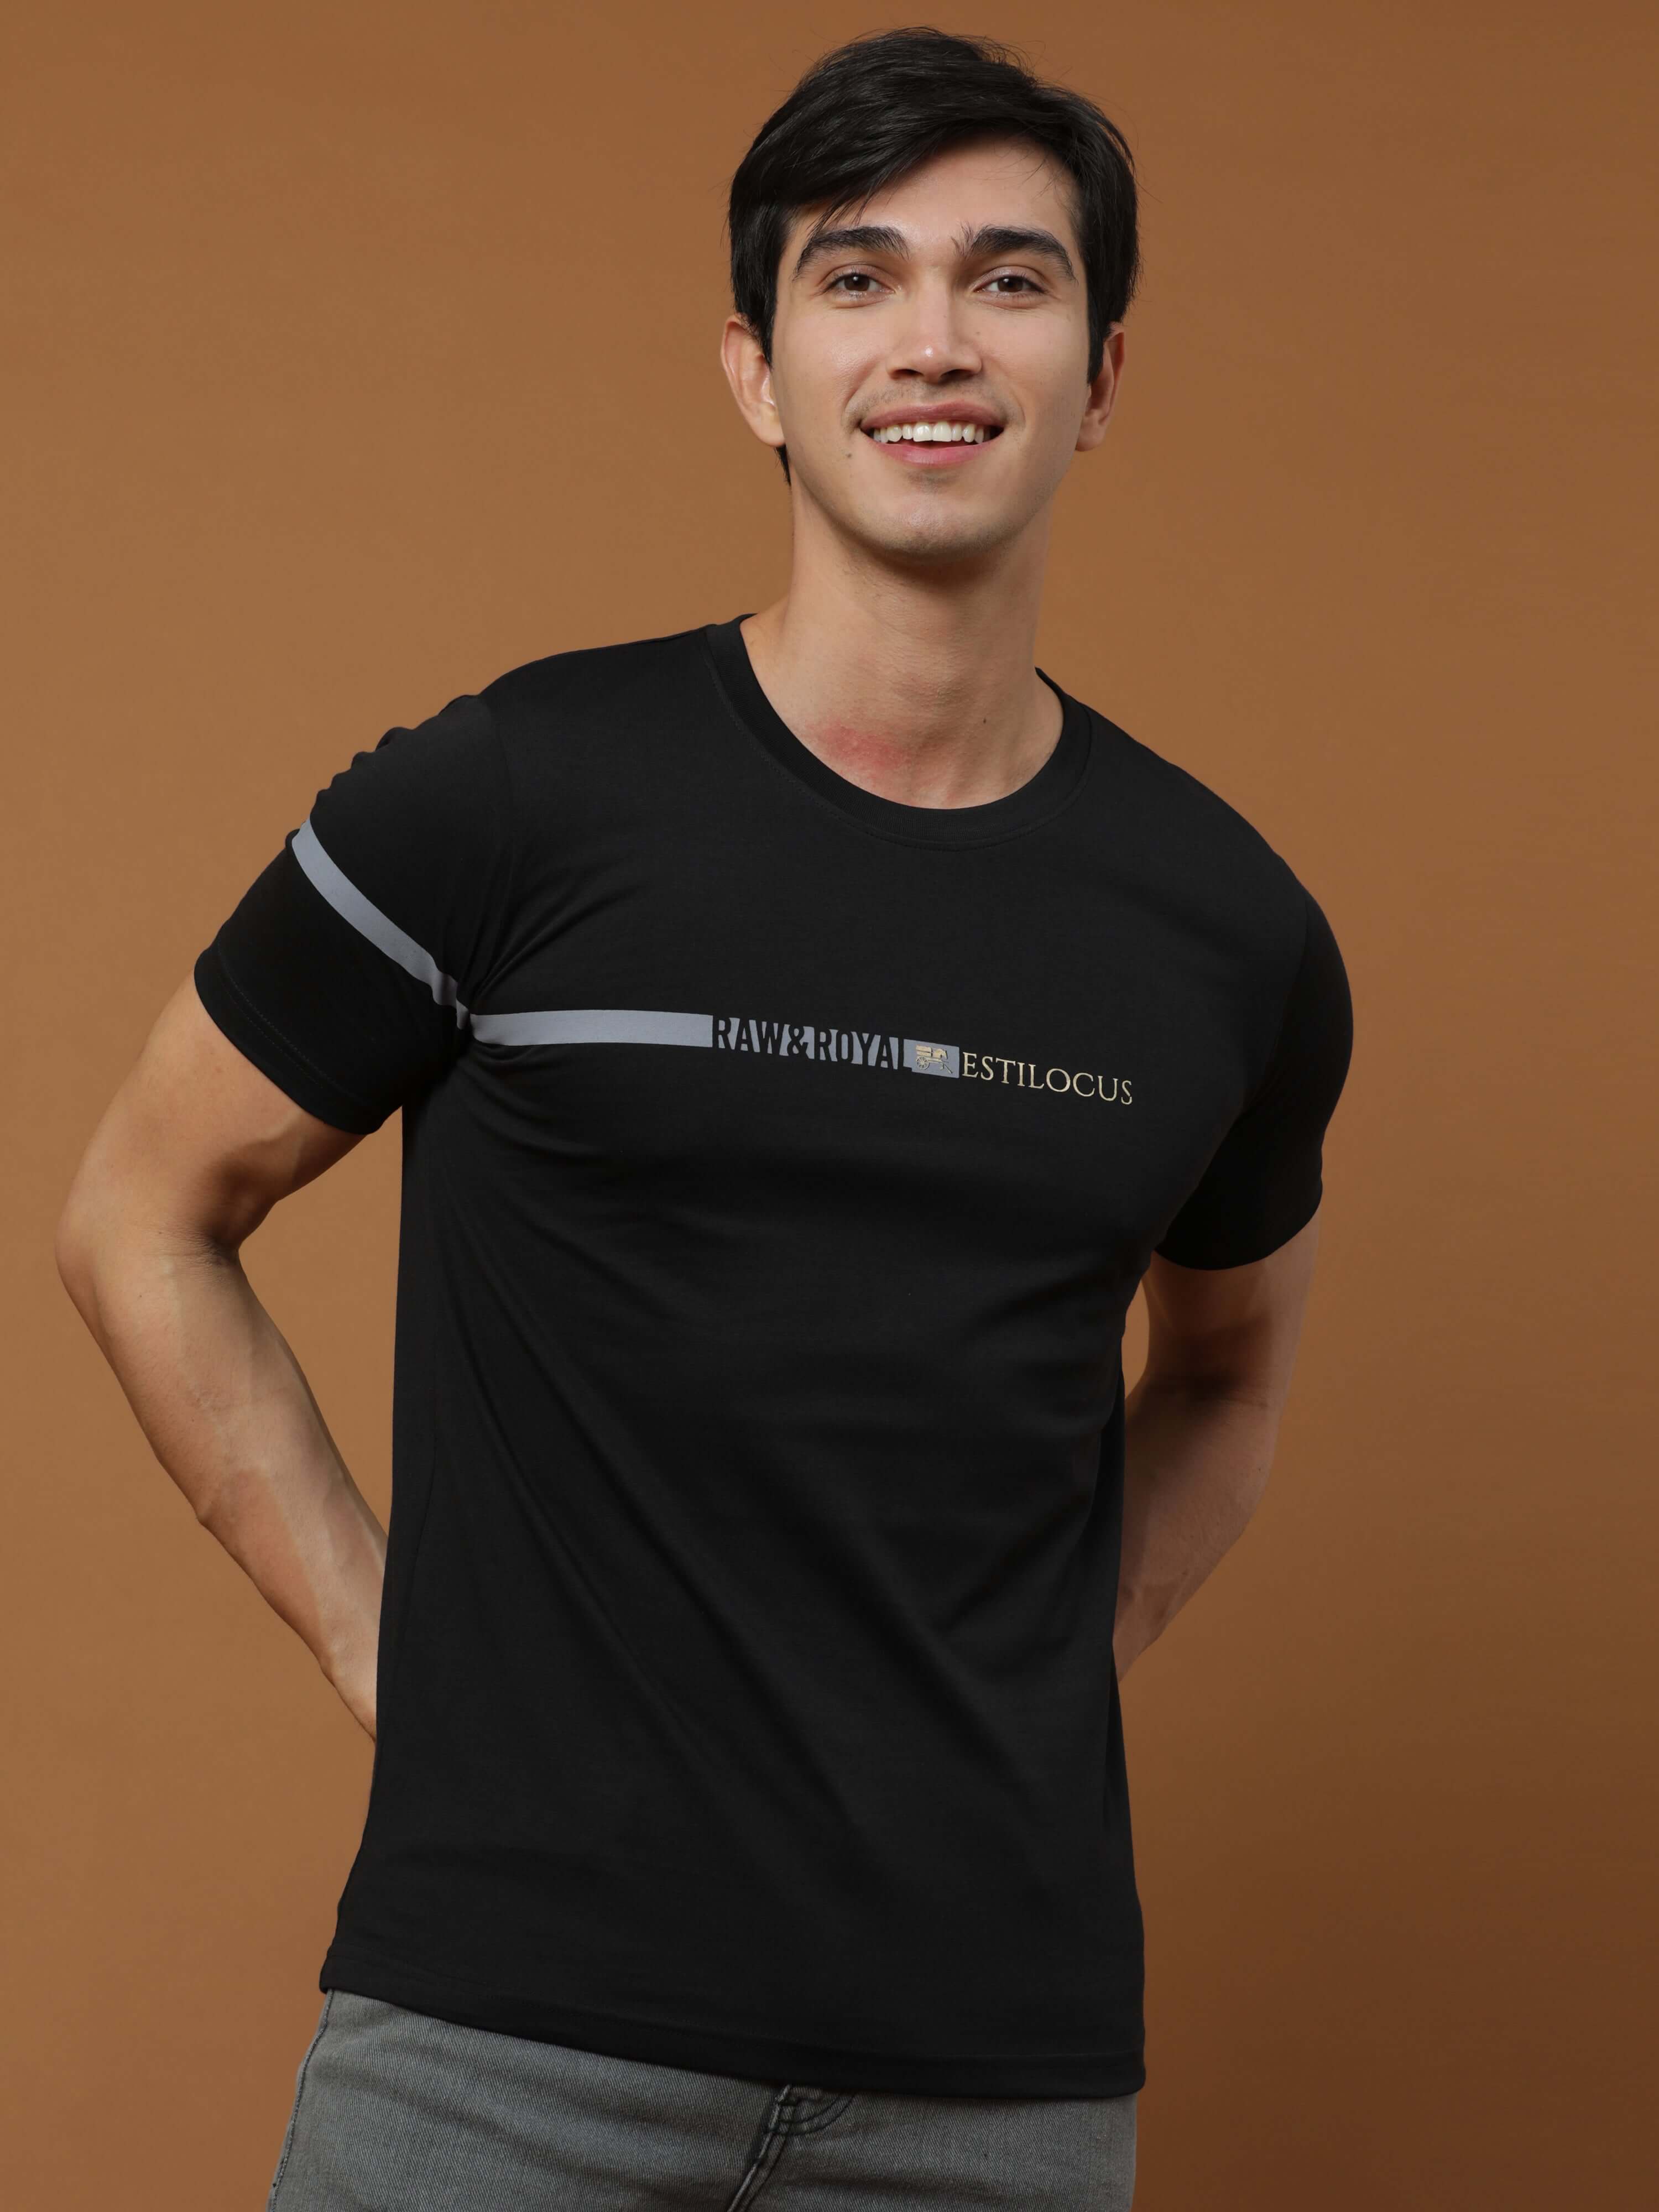 Raw&Royal Black Printed T Shirt shop online at Estilocus. 100% Cotton Designed and printed on knitted fabric. The fabric is stretchy and lightweight, with a soft skin feel and no wrinkles. Crew neck collar which is smooth on the neck and keeps you comfort